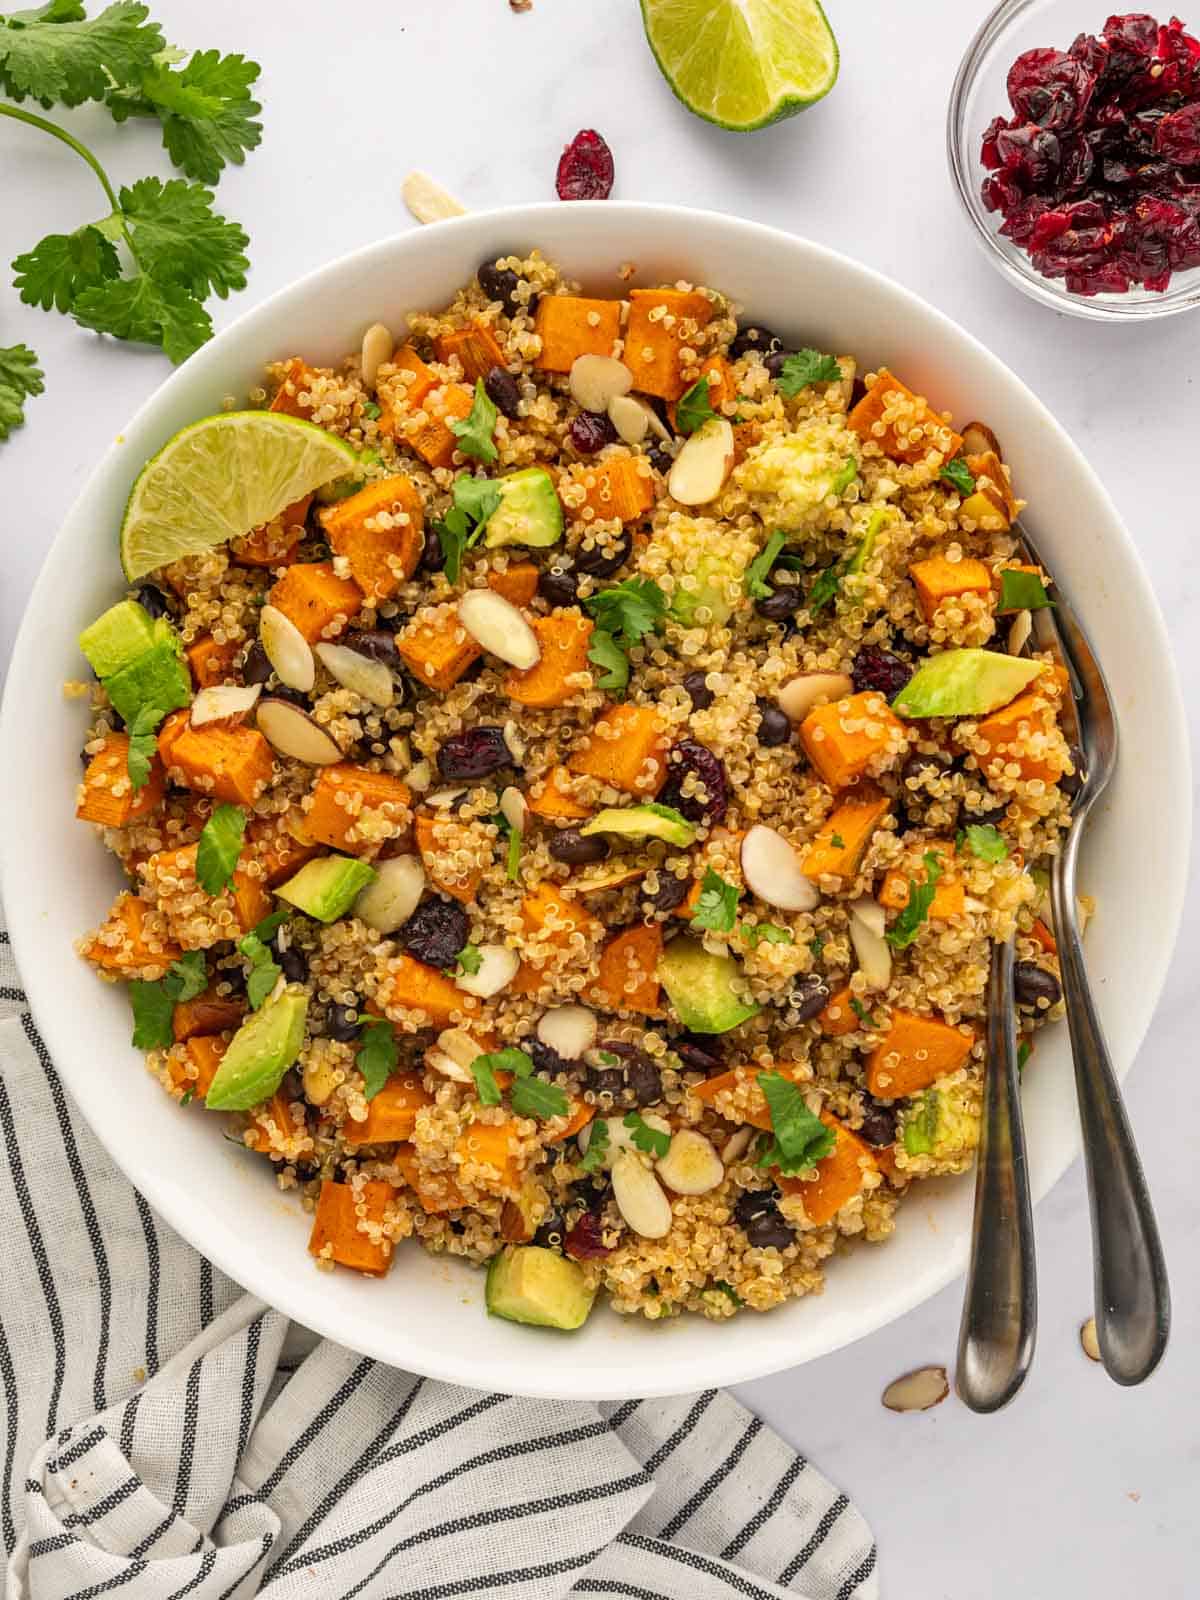 A bowl of quinoa salad with roasted sweet potatoes.